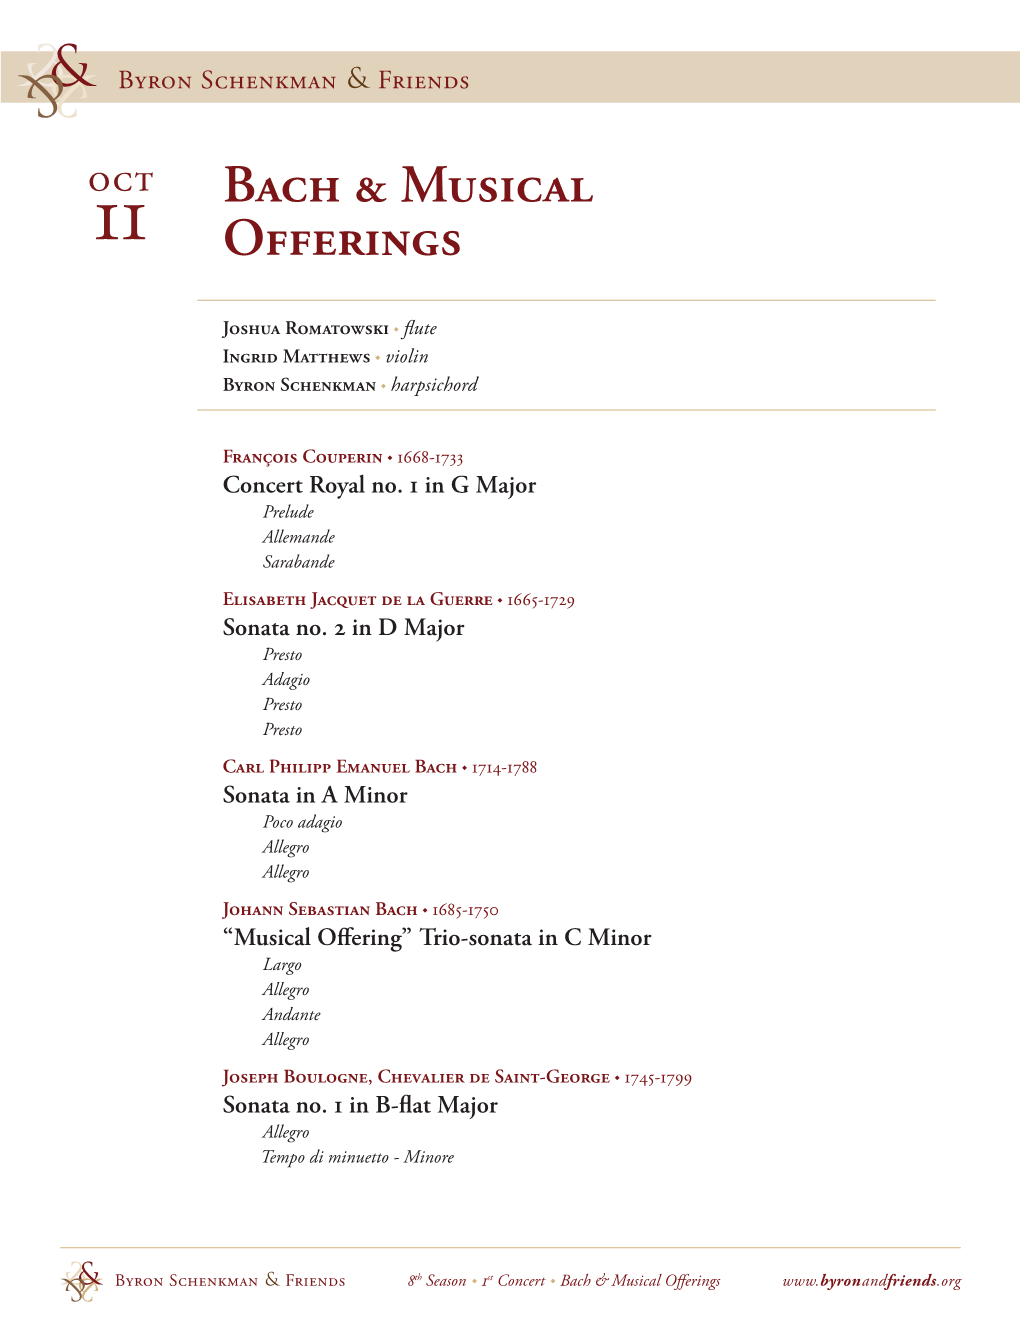 Bach & Musical Offerings